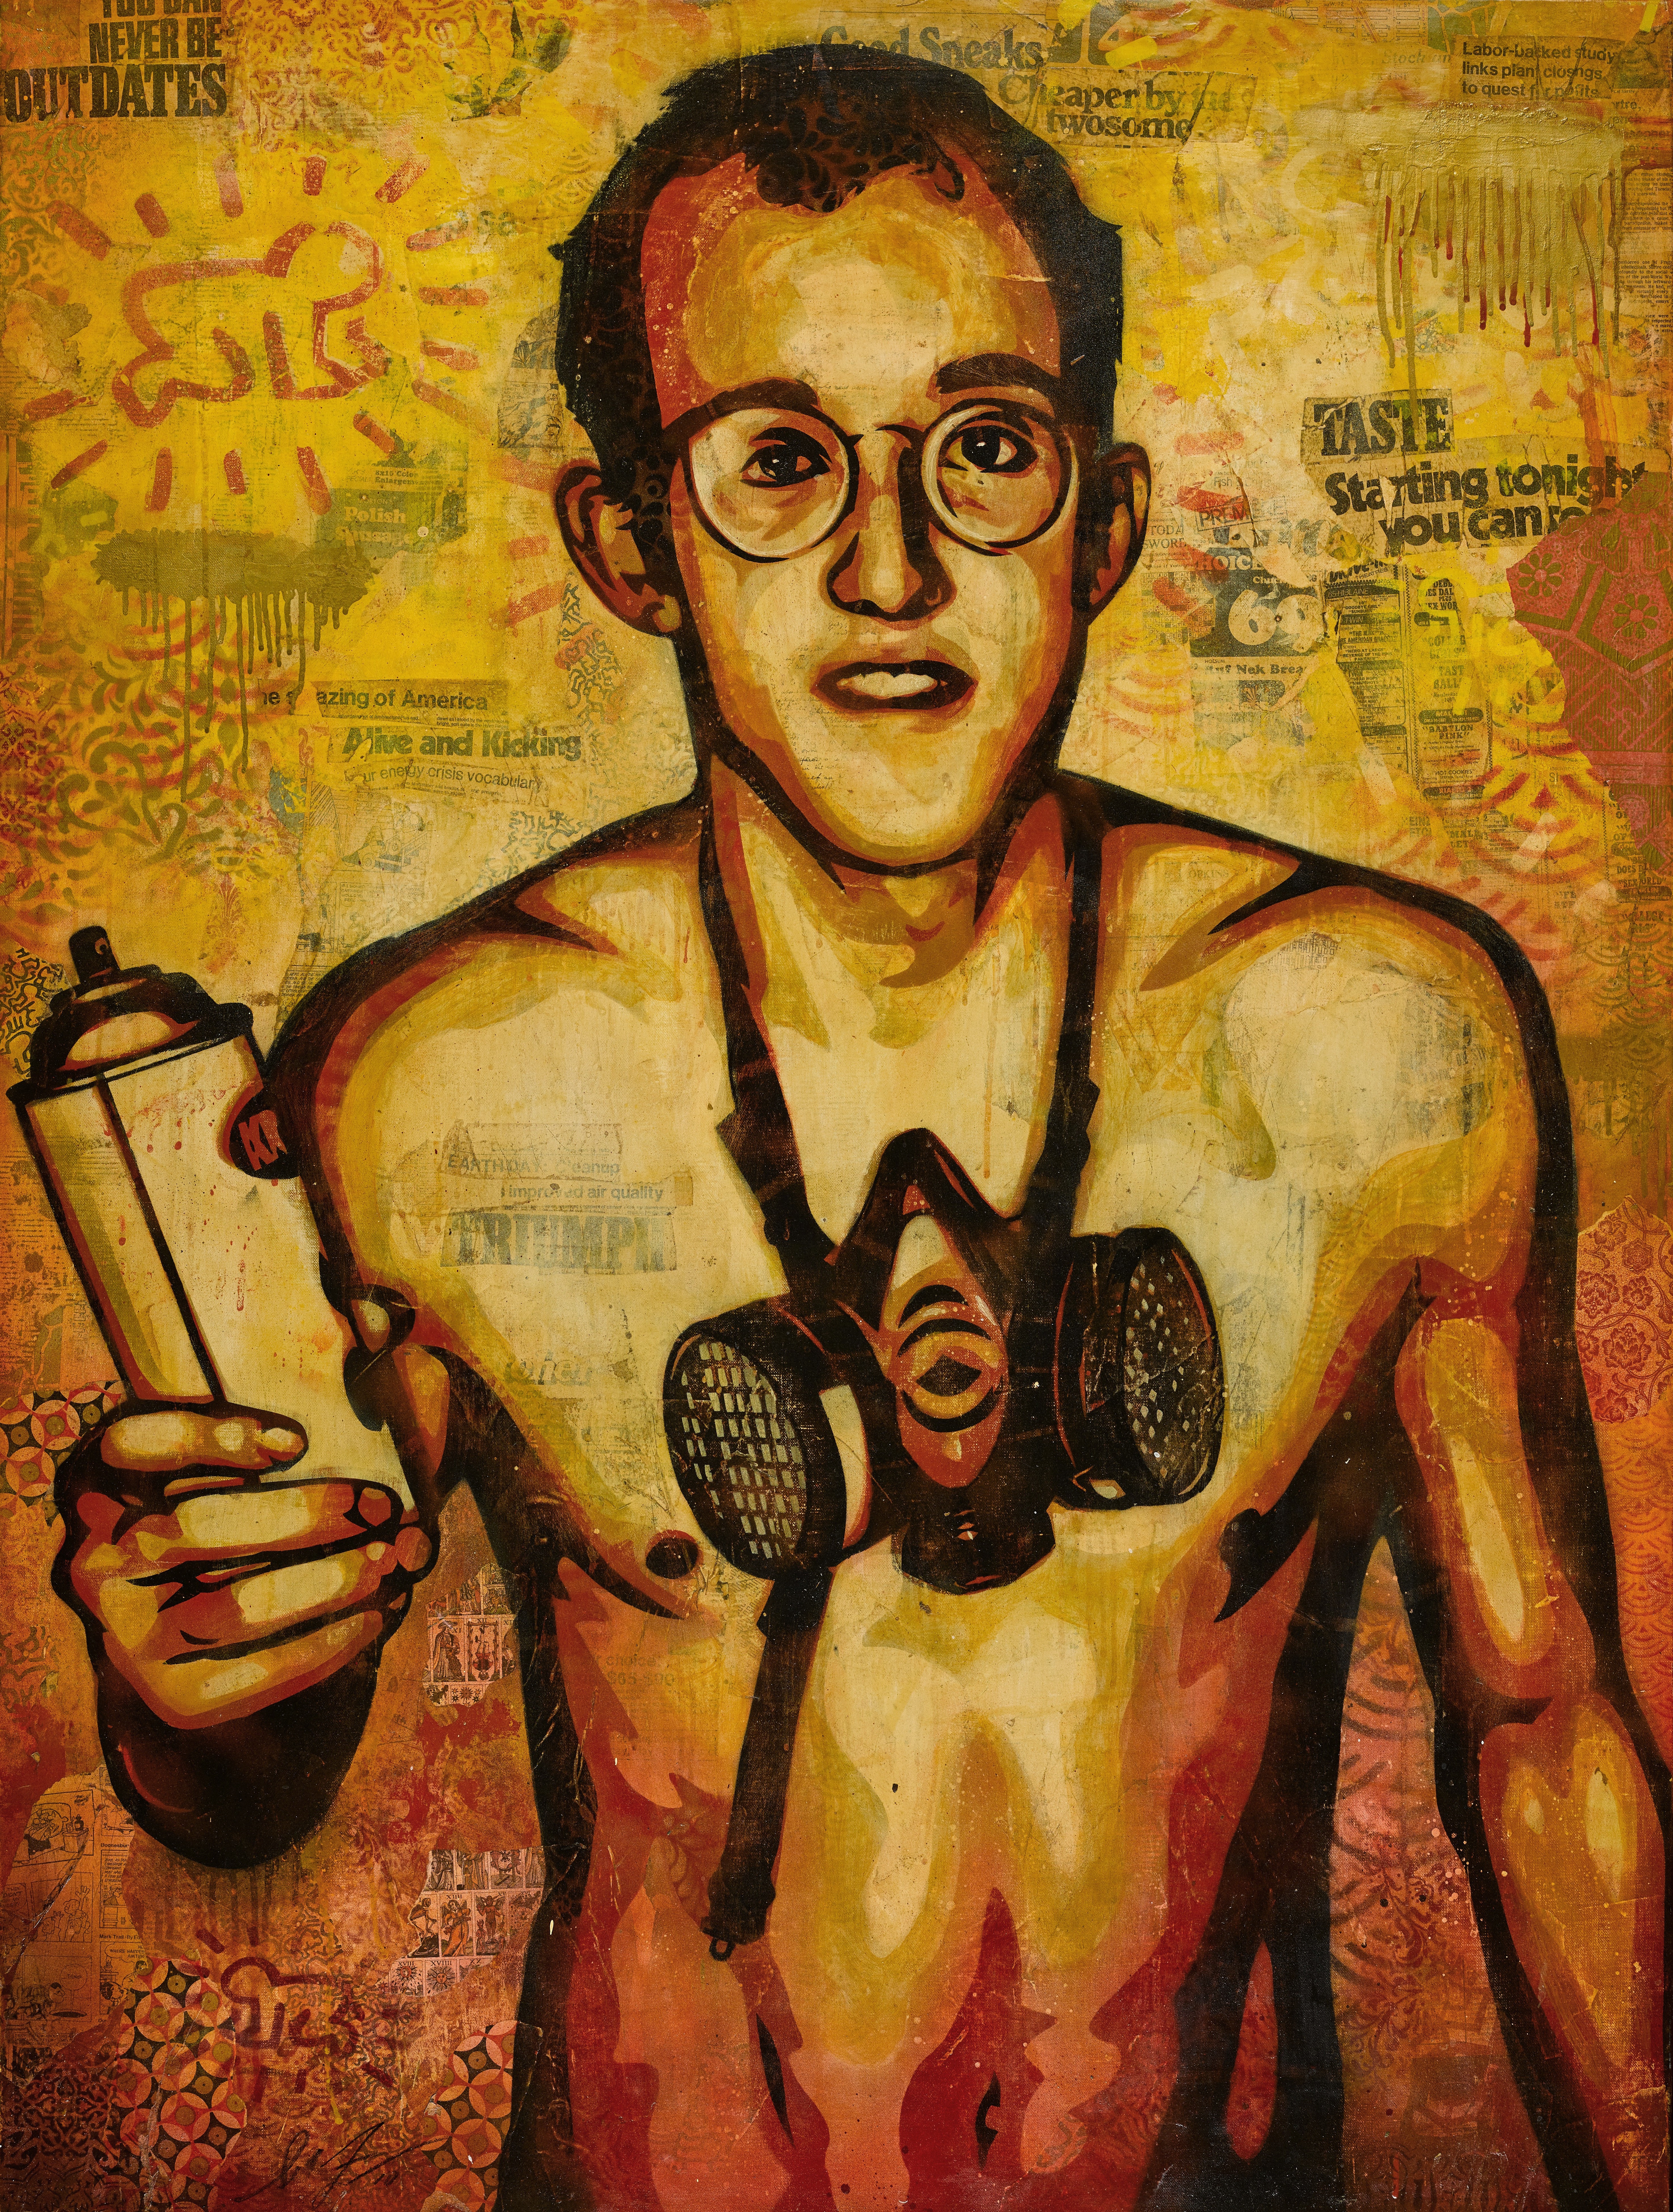 Keith Haring (2) by Shepard Fairey, 10